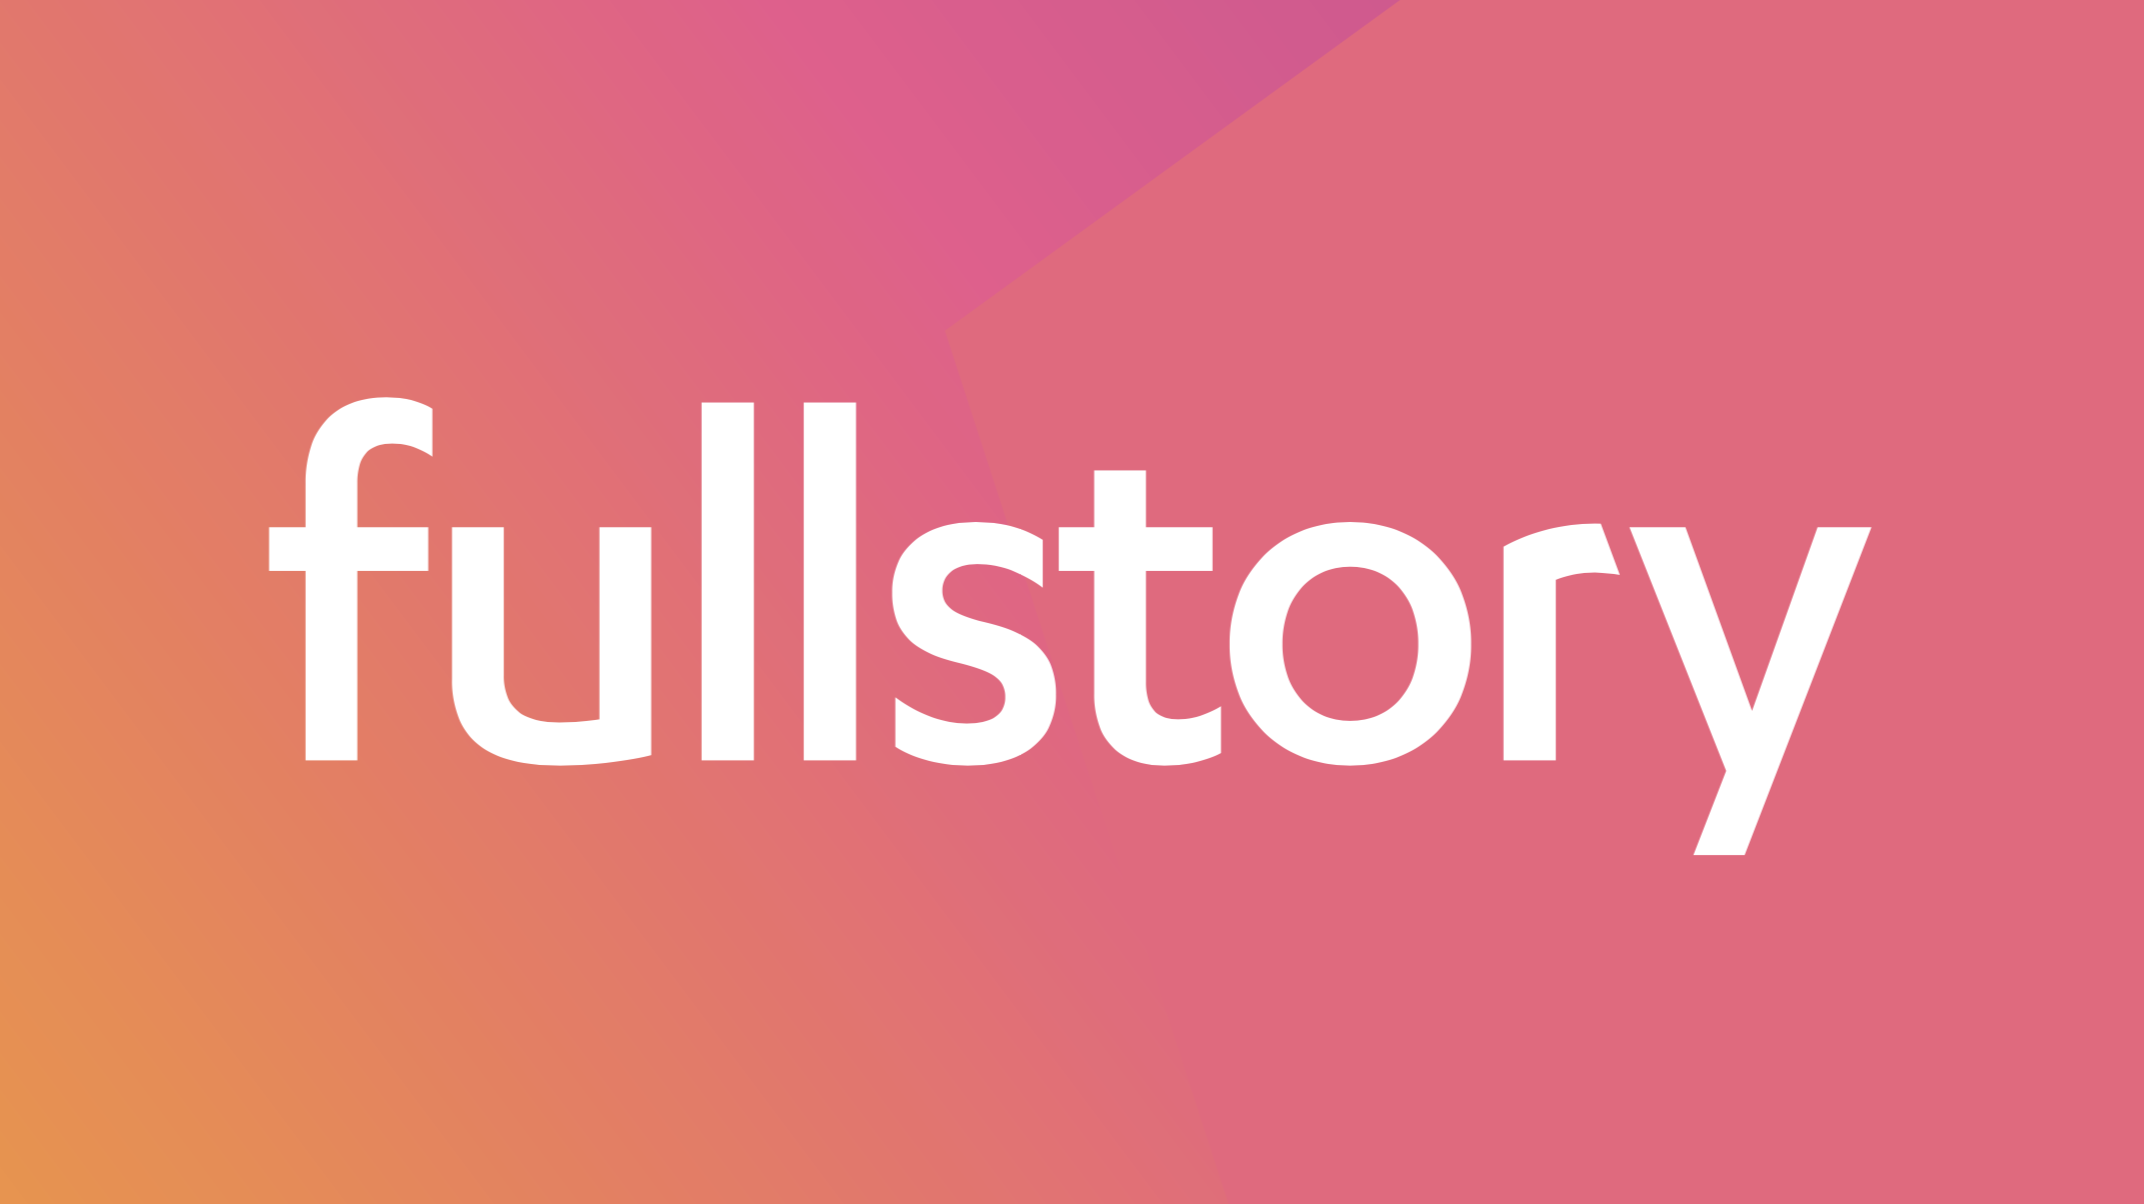 fullstory archives - software engineering daily